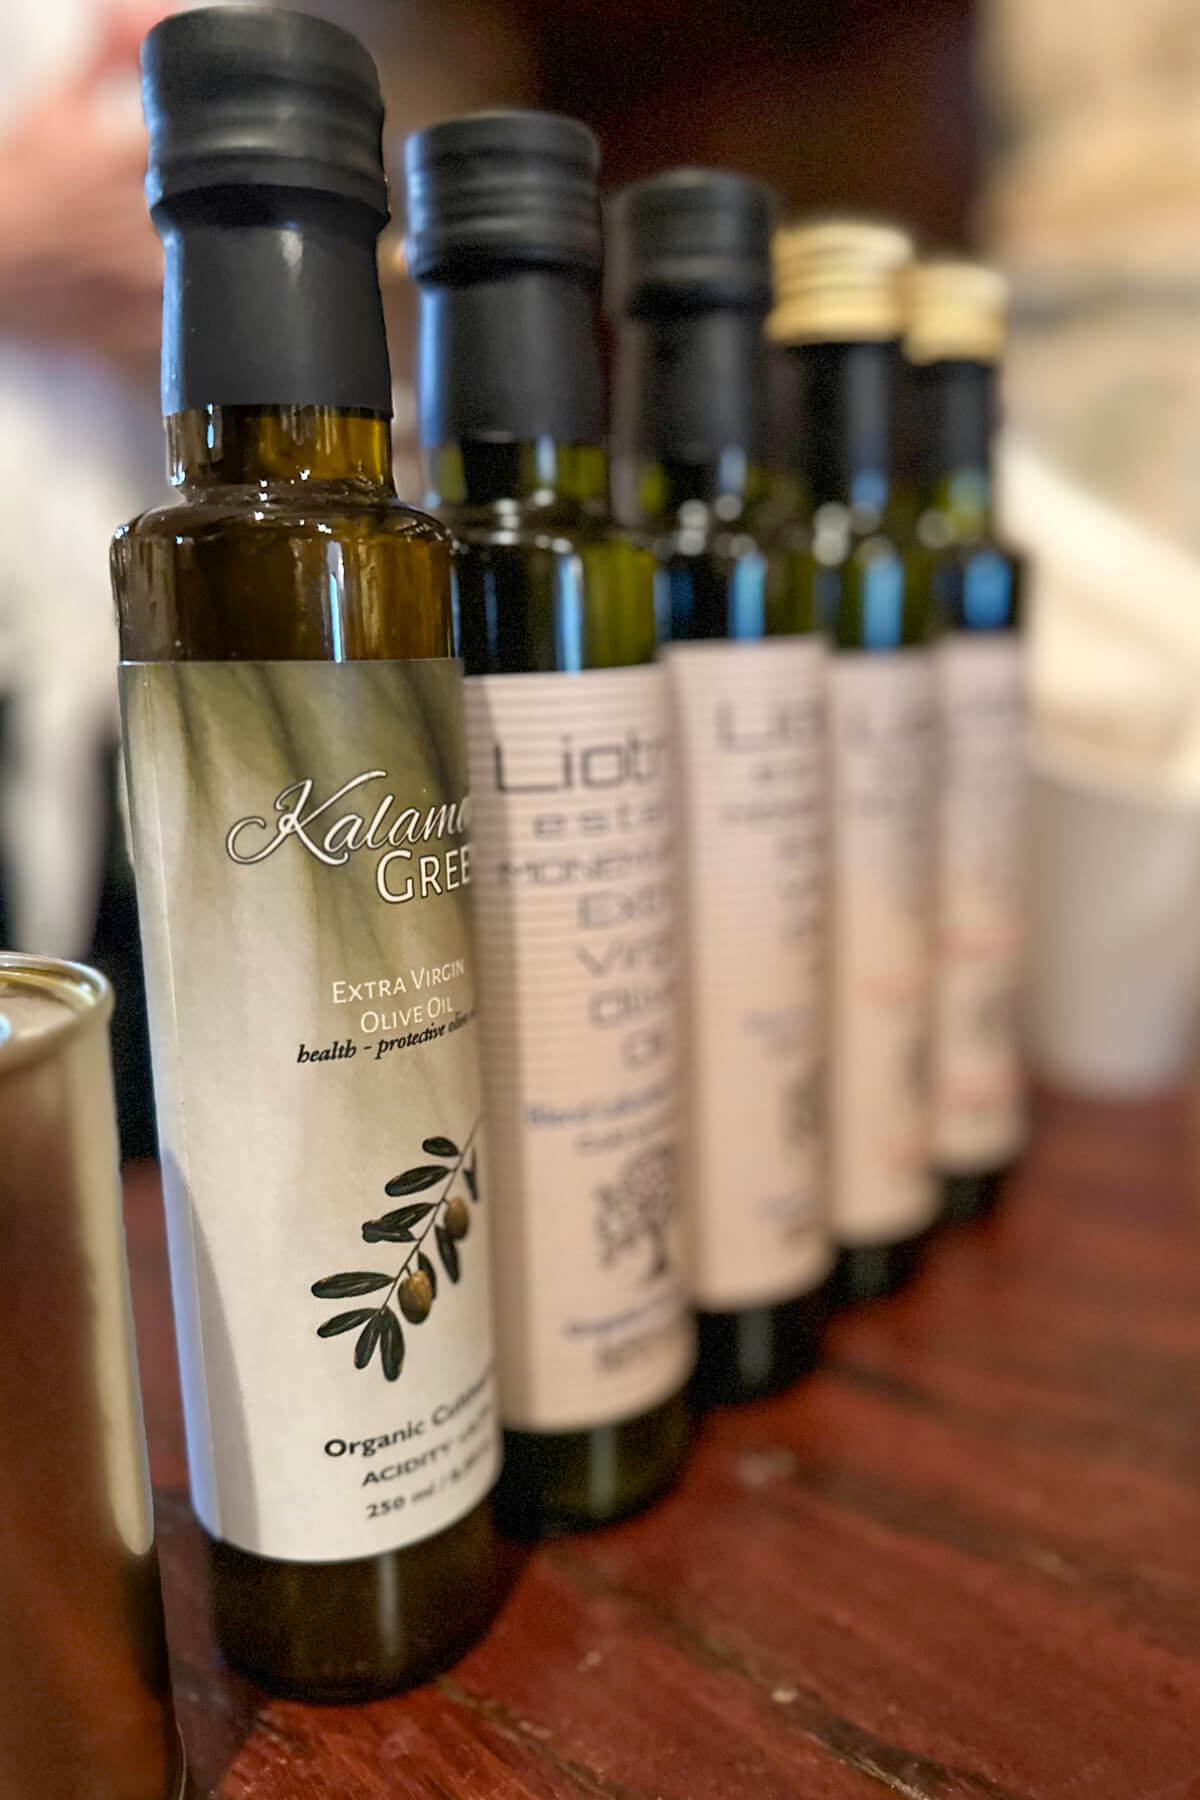 A lineup of the bottles of olive oil ready for the olive oil tasting